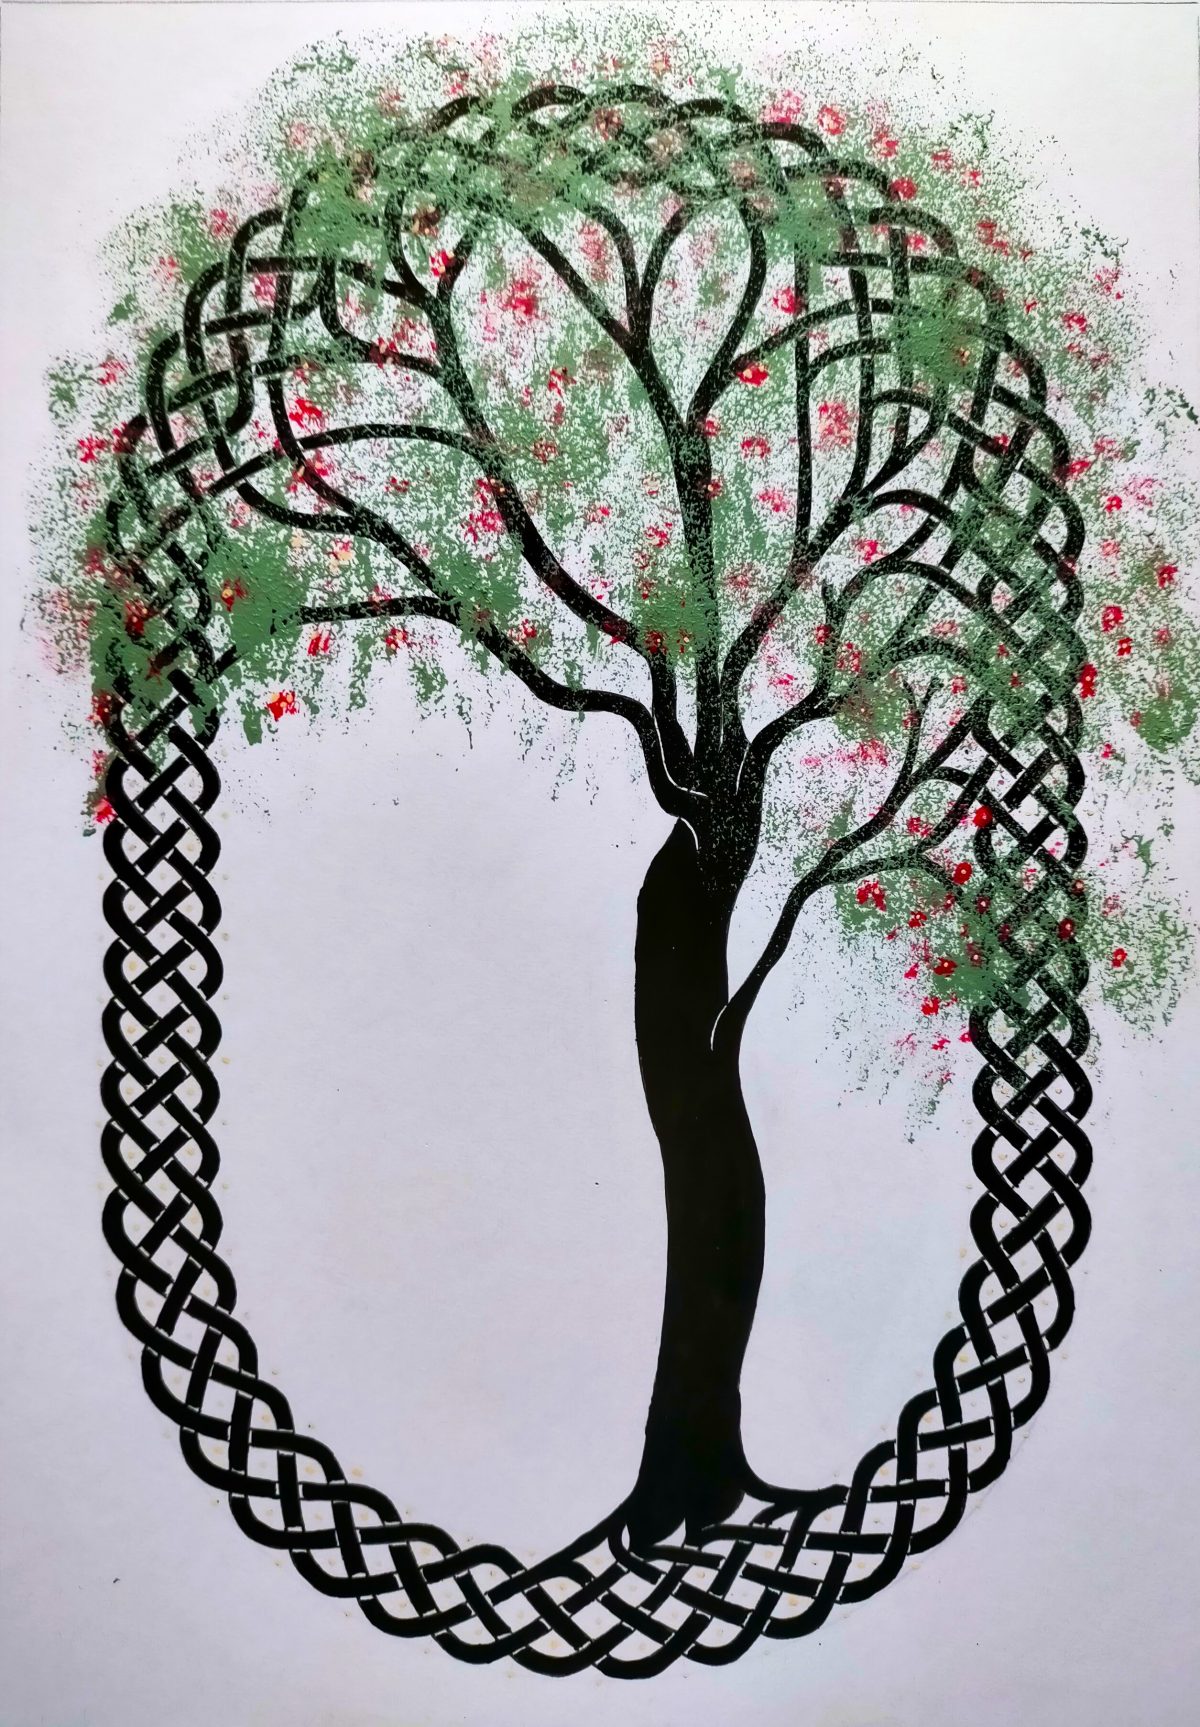 Ironbark Tree of Life, painting on paper demonstration for my students.